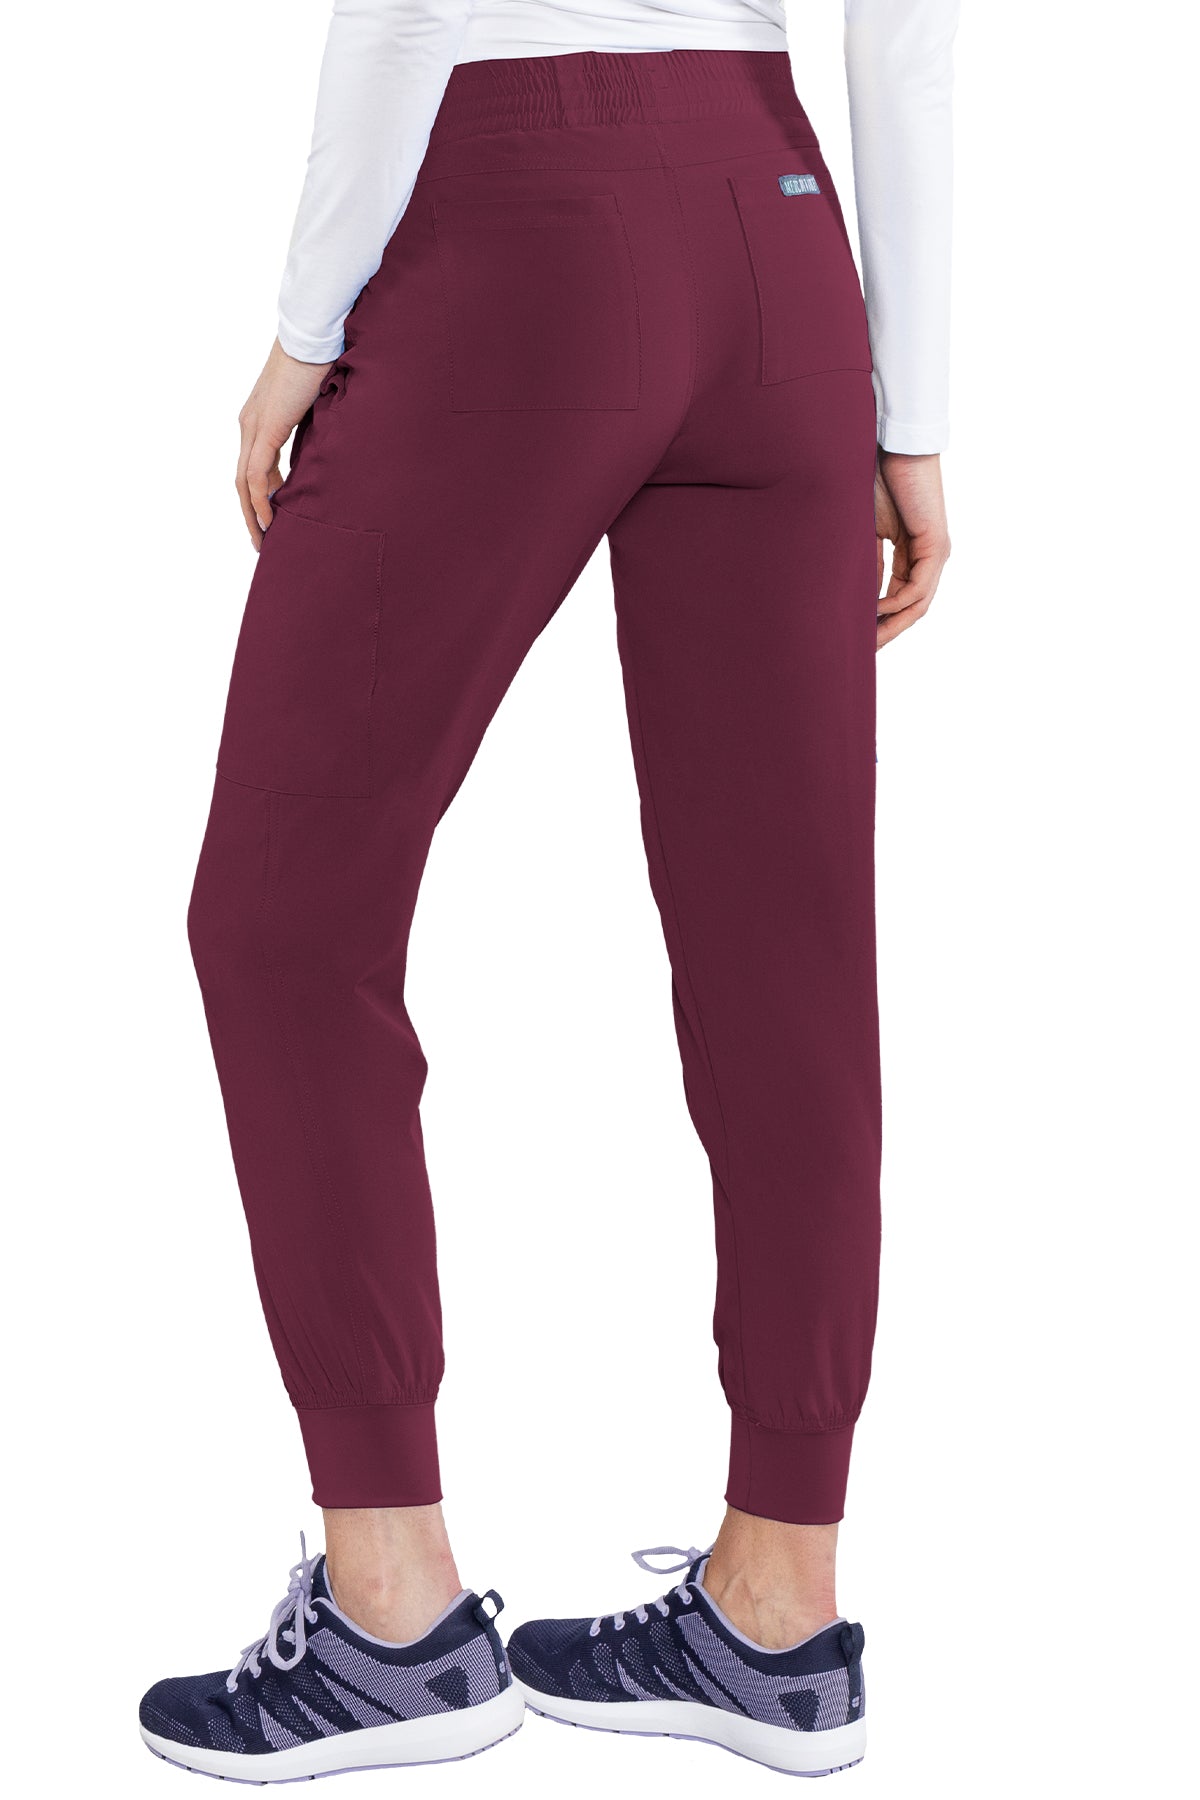 Energy Smocked Waist Jogger by Med Couture (Regular) XS-3XL / Wine